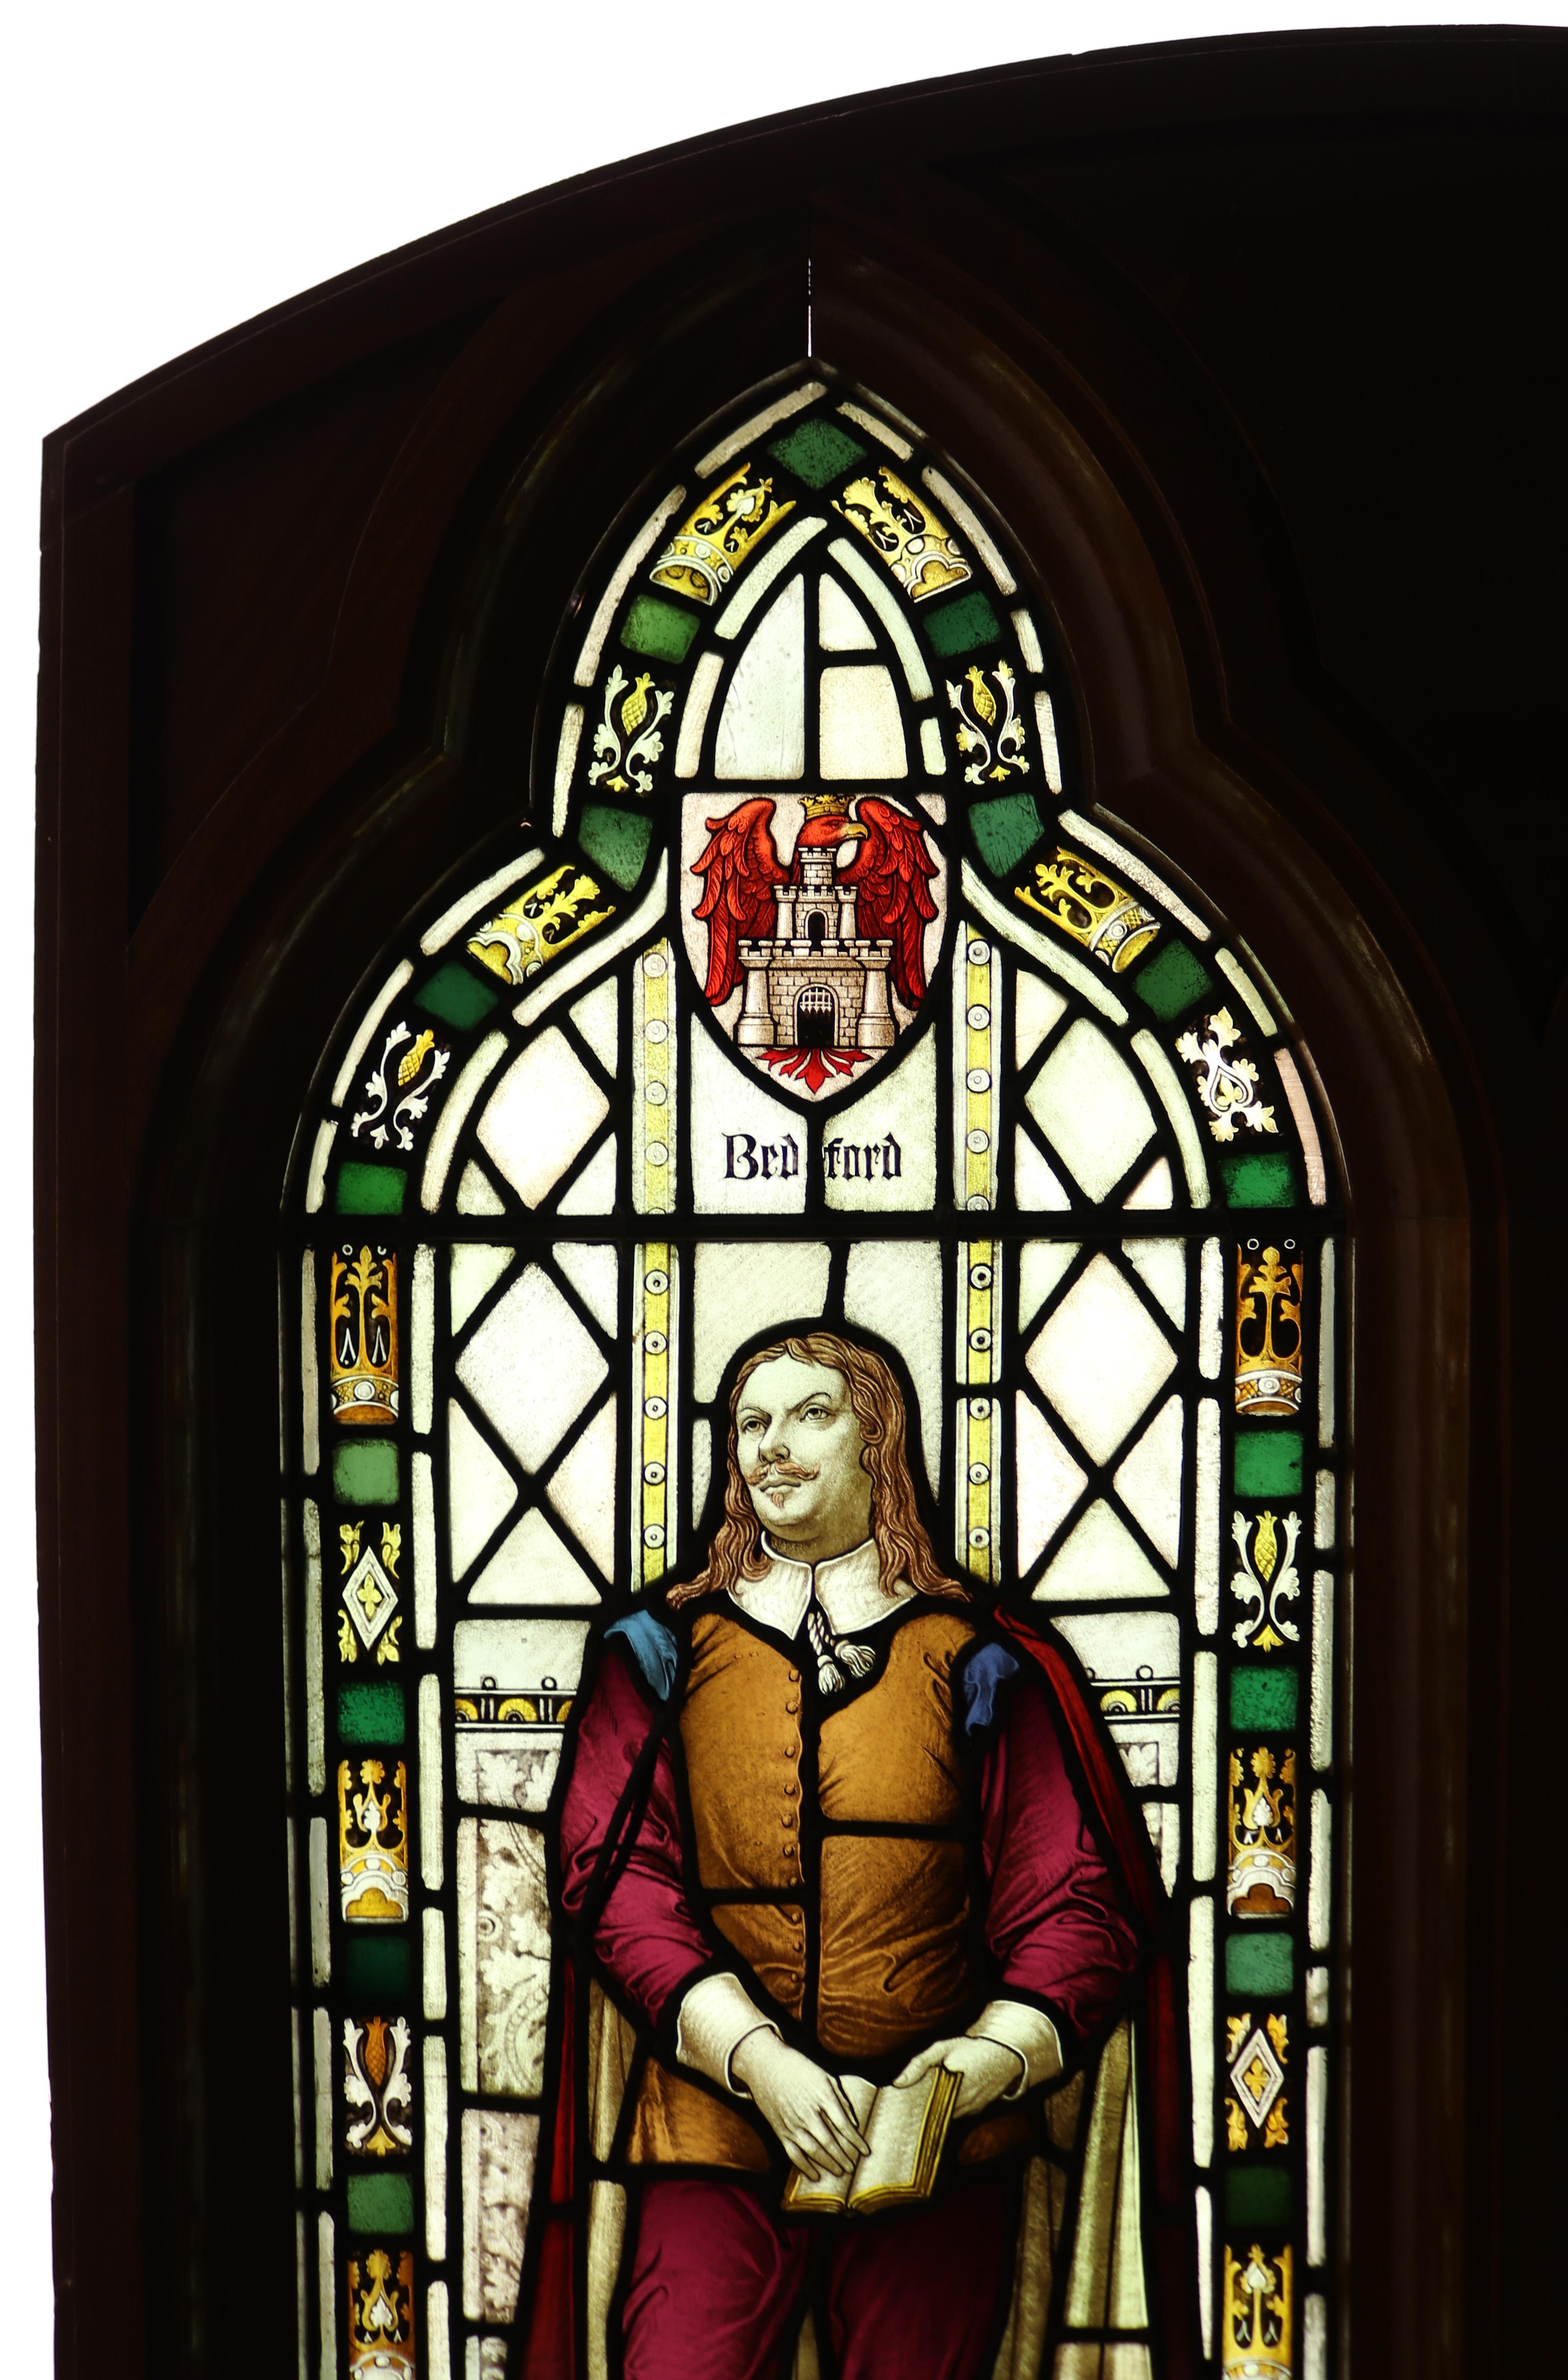 A large stained glass window depicting Oliver Cromwell, an English general and statesman who led the Parliament of England's armies against King Charles I during the English Civil War and ruled the British Isles as Lord Protector from 1653 until his